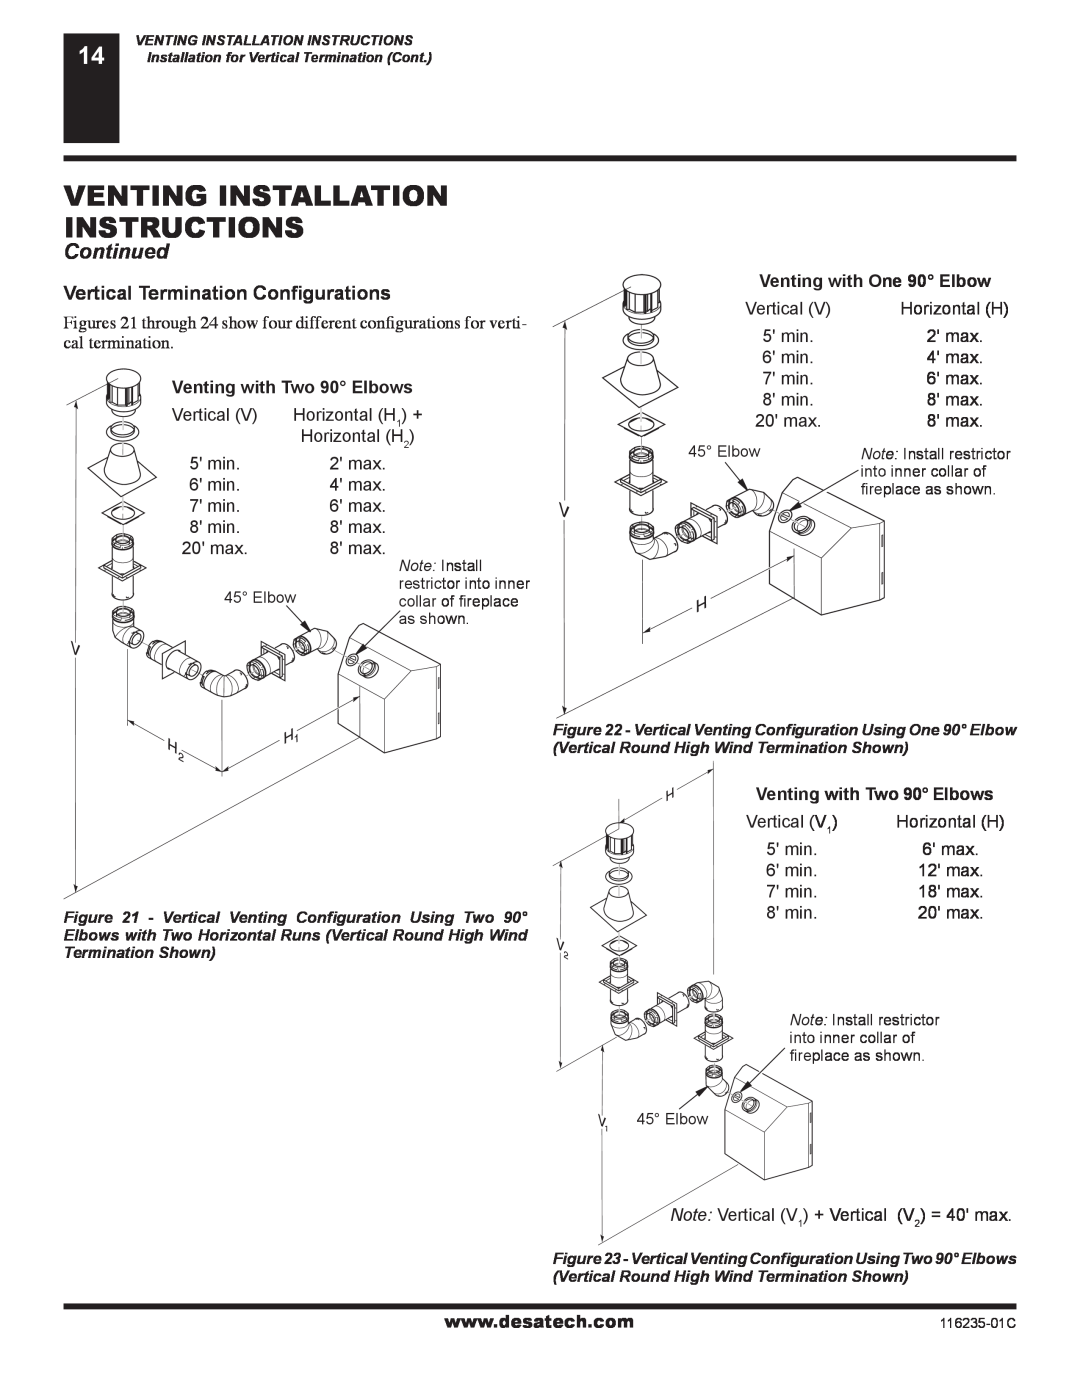 Desa (V)VC36NE Venting Installation Instructions, Continued, Vertical Termination Conﬁgurations, Venting with One 90 Elbow 